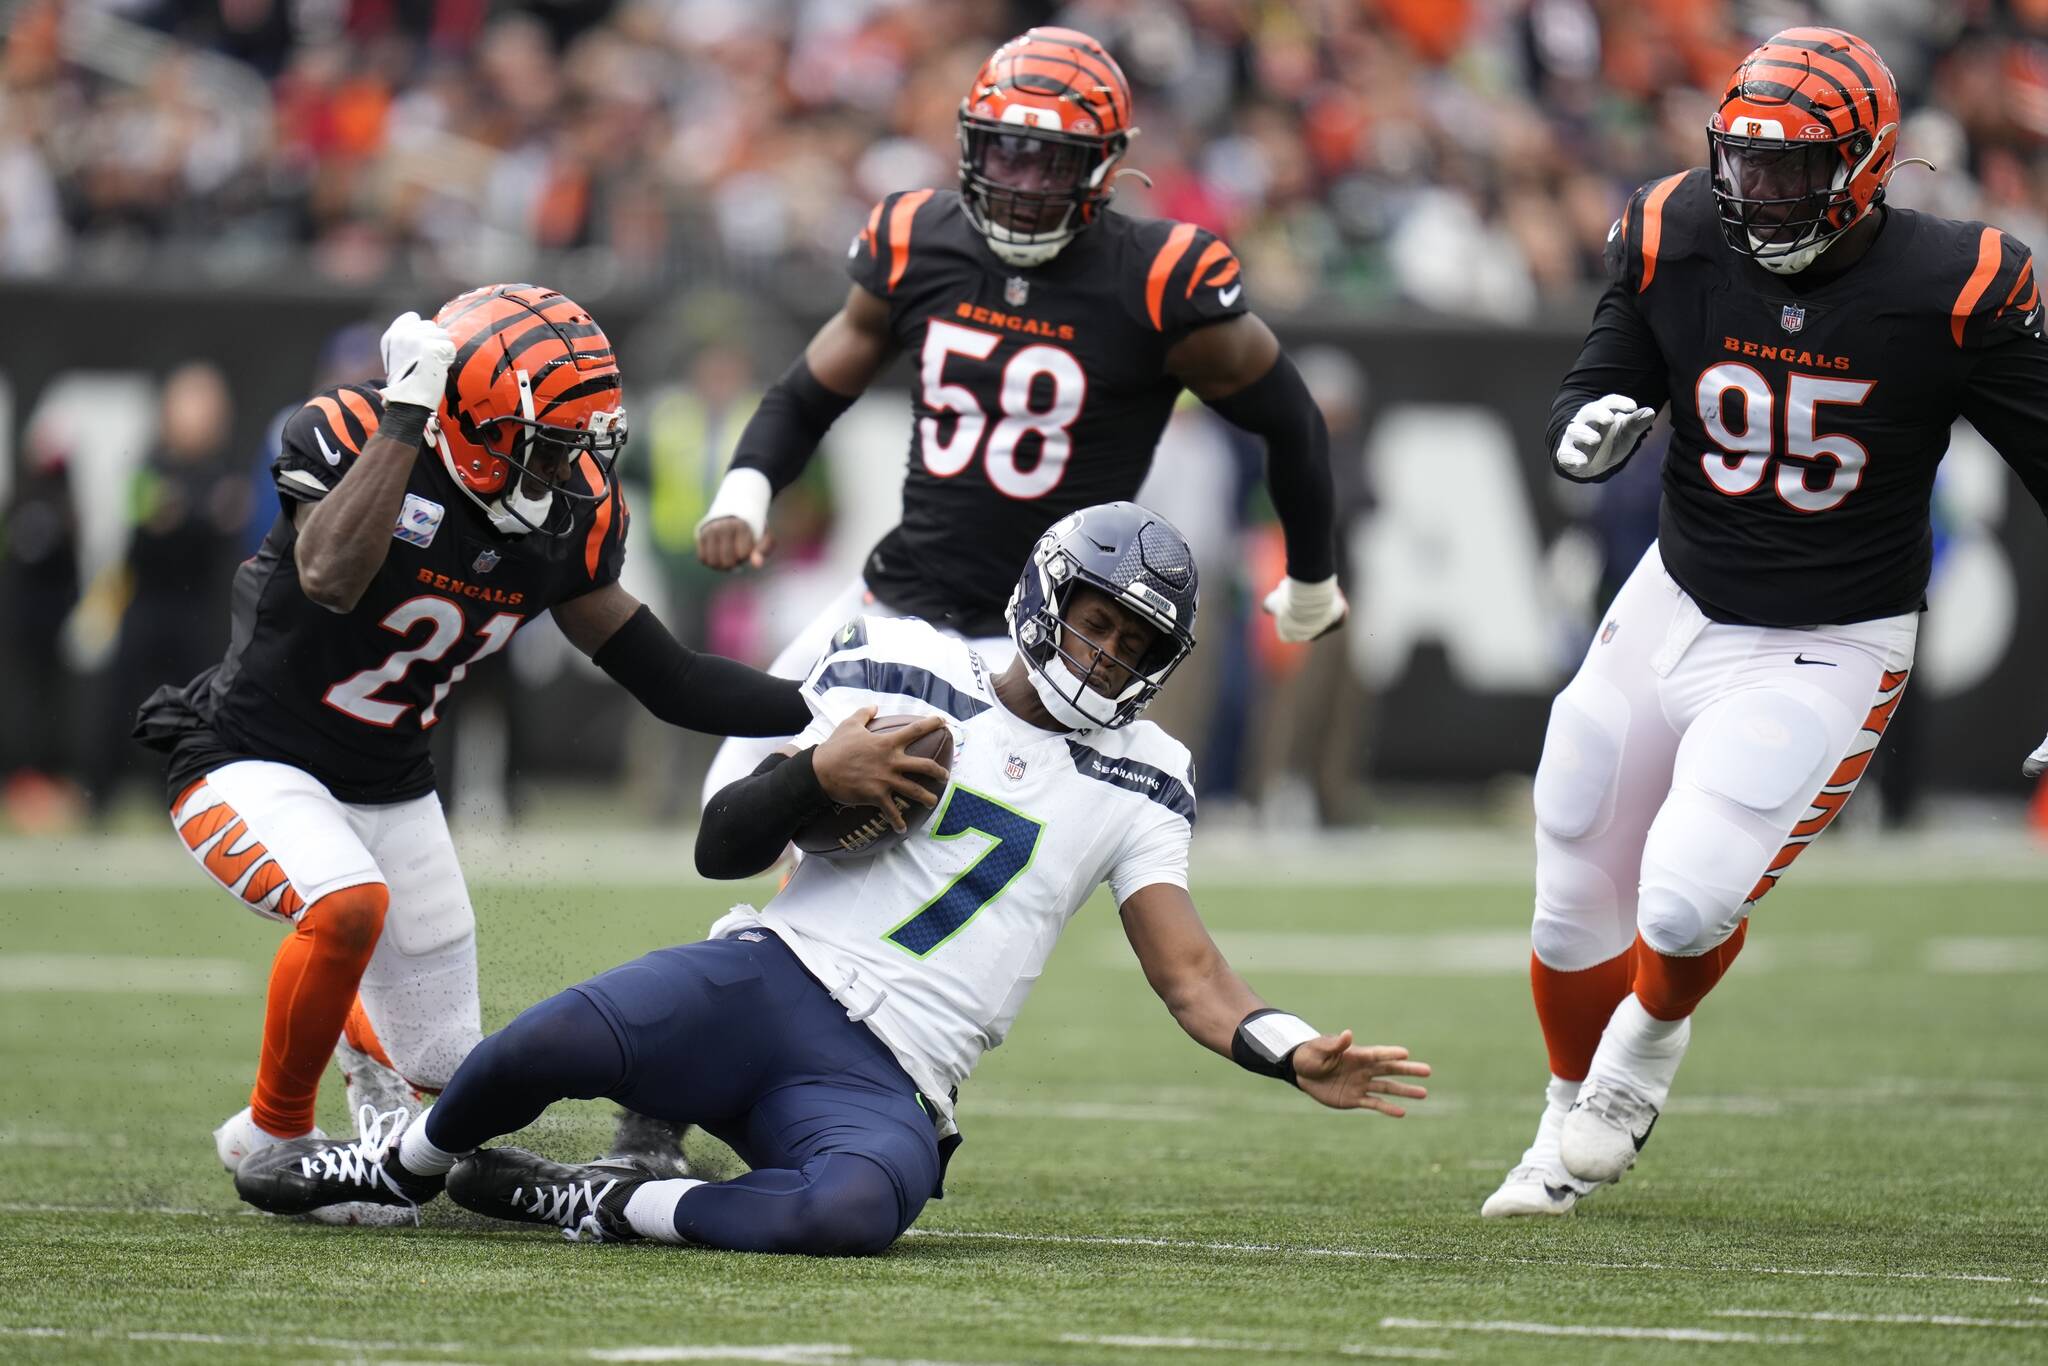 Seattle Seahawks quarterback Geno Smith slides in front of Cincinnati Bengals’ Mike Hilton (21) during the second half of Sunday’s game in Cincinnati. (AP Photo/Michael Conroy)